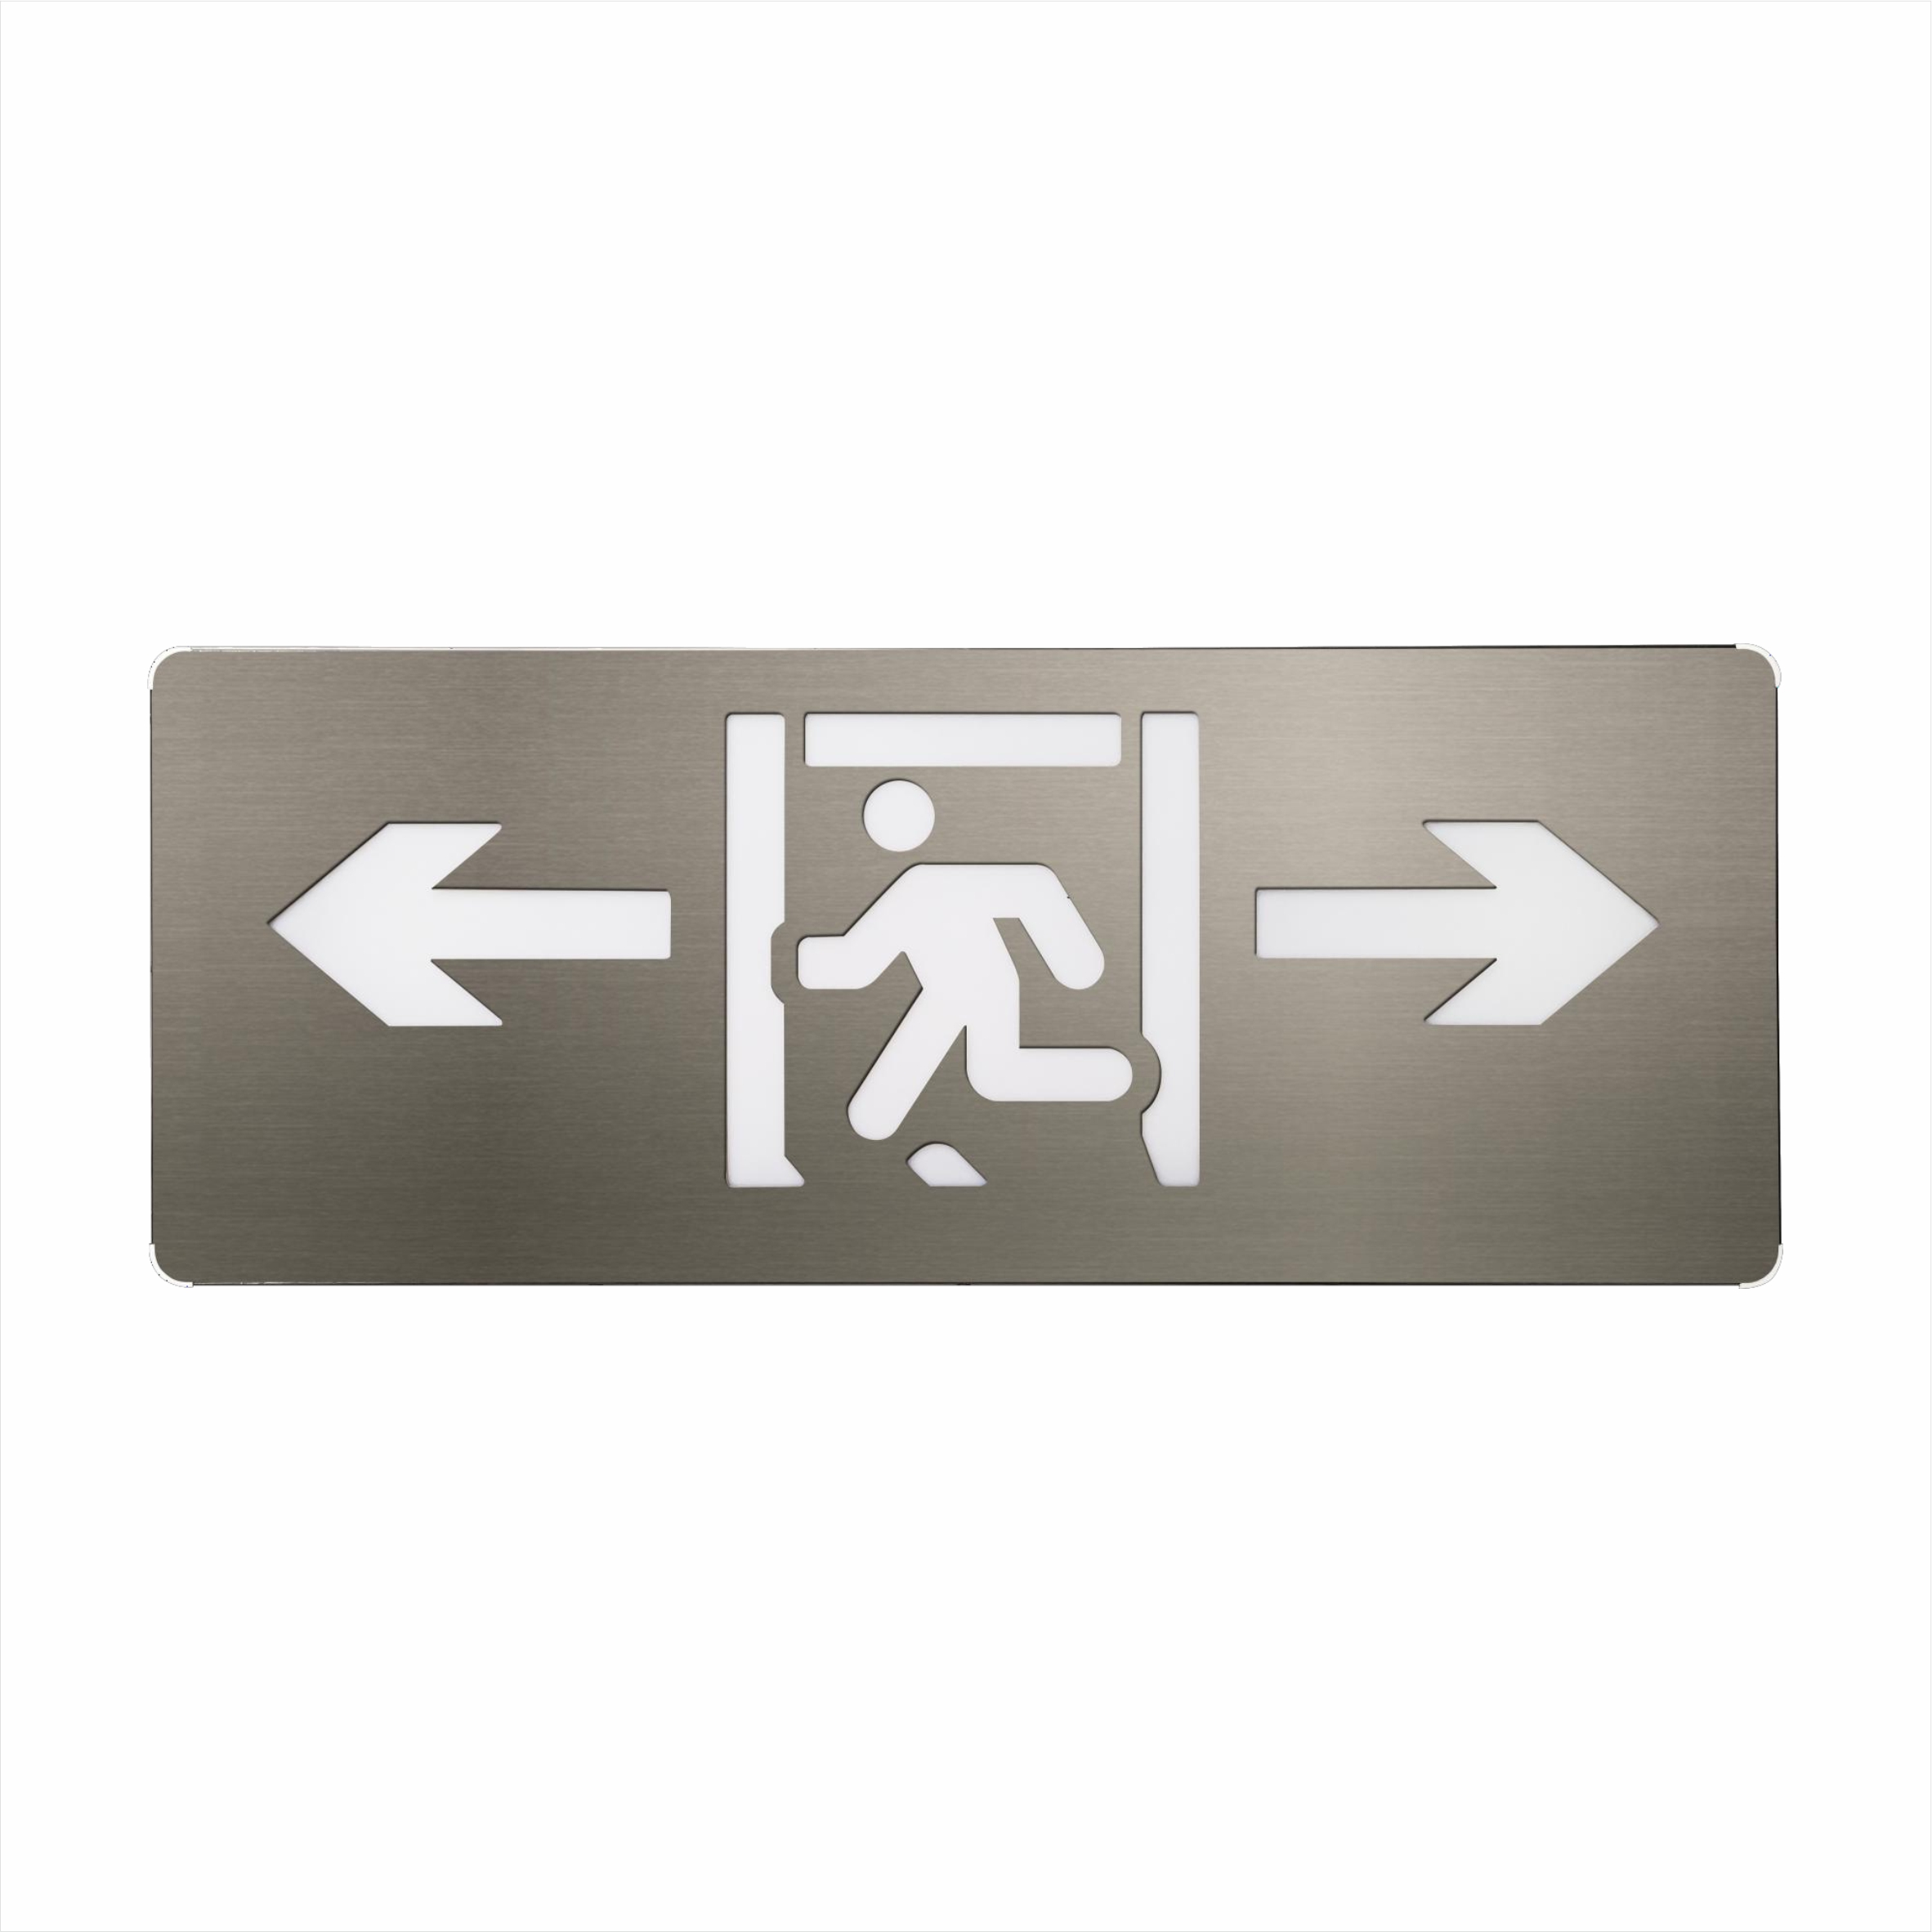 Simple modern safety exit guide sign lamp